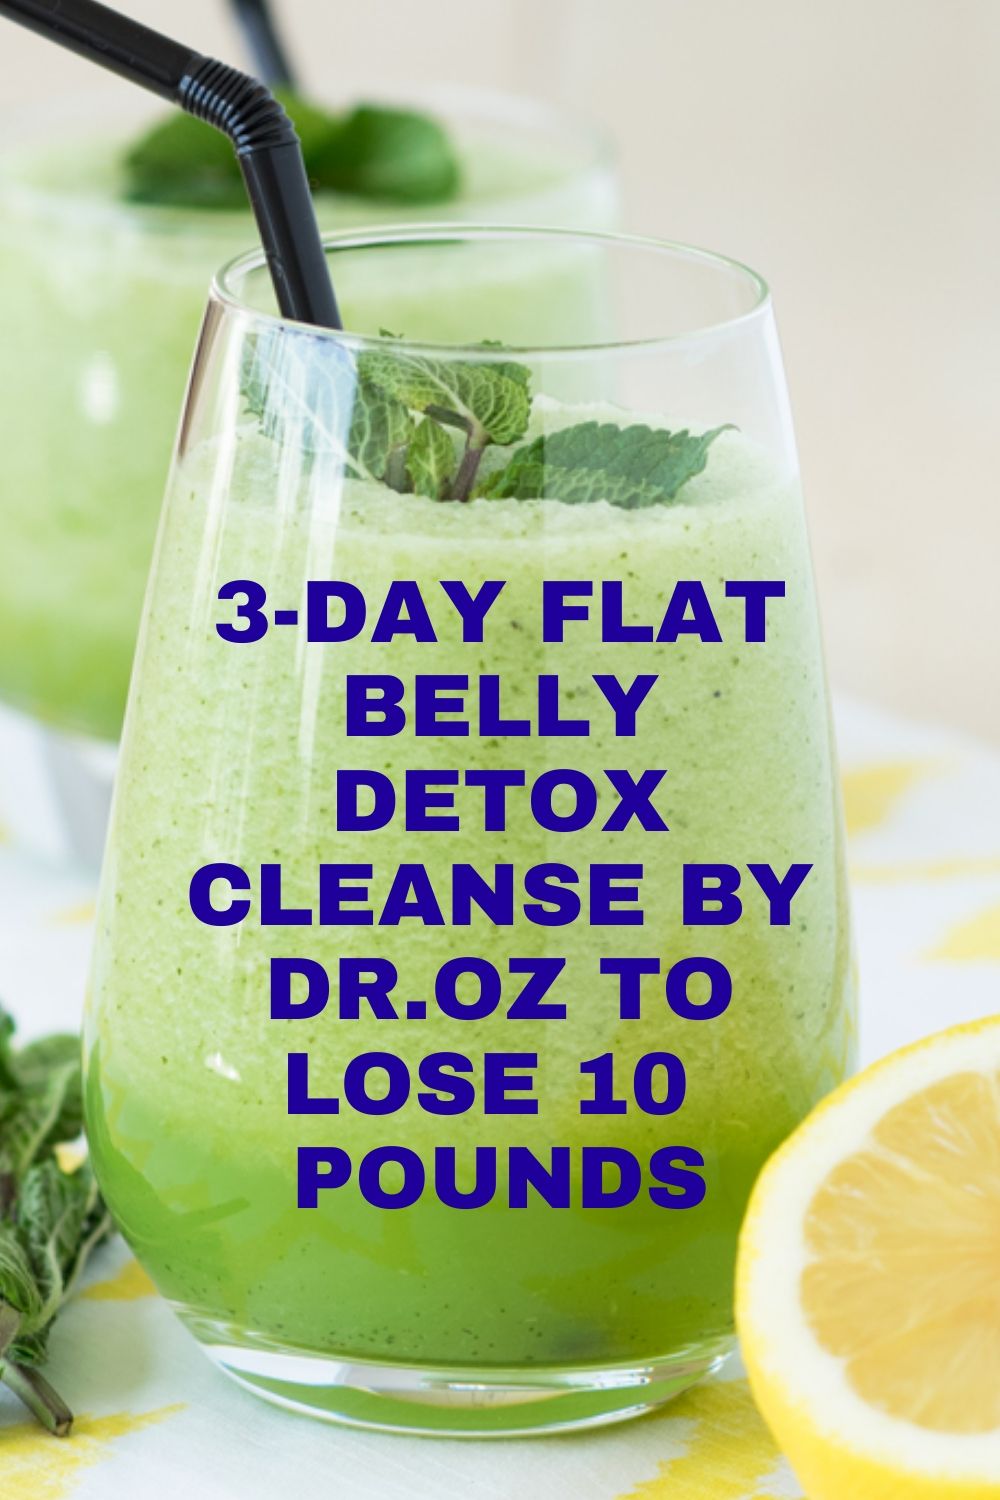 (3 Day) Flat Belly Detox By Doctor 0z To Lose 10 Pounds ...